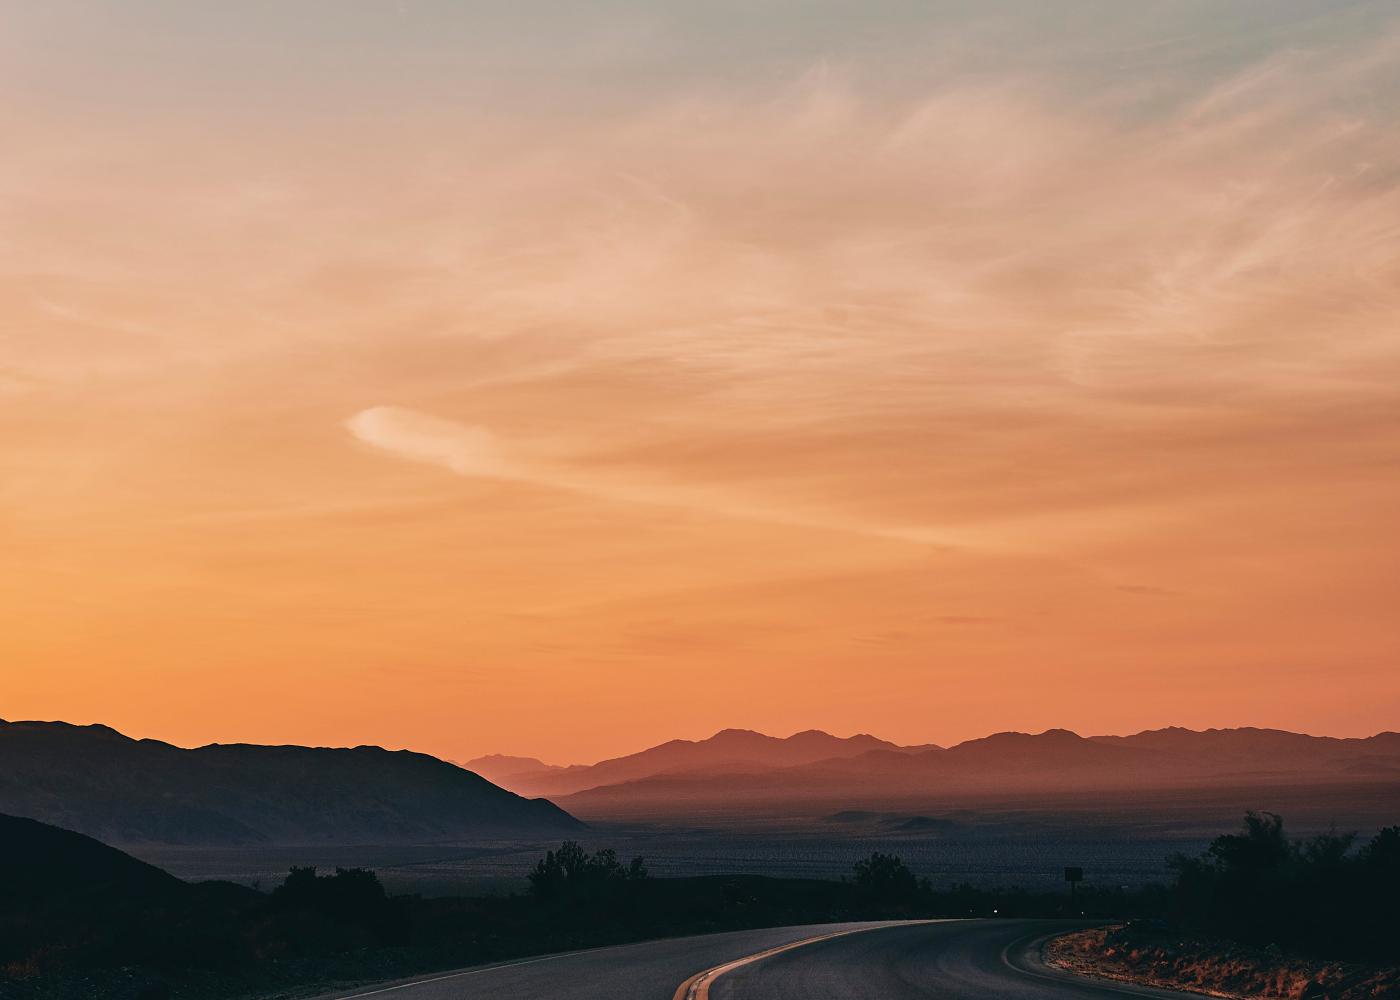 View down empty California road across the desert at sunset